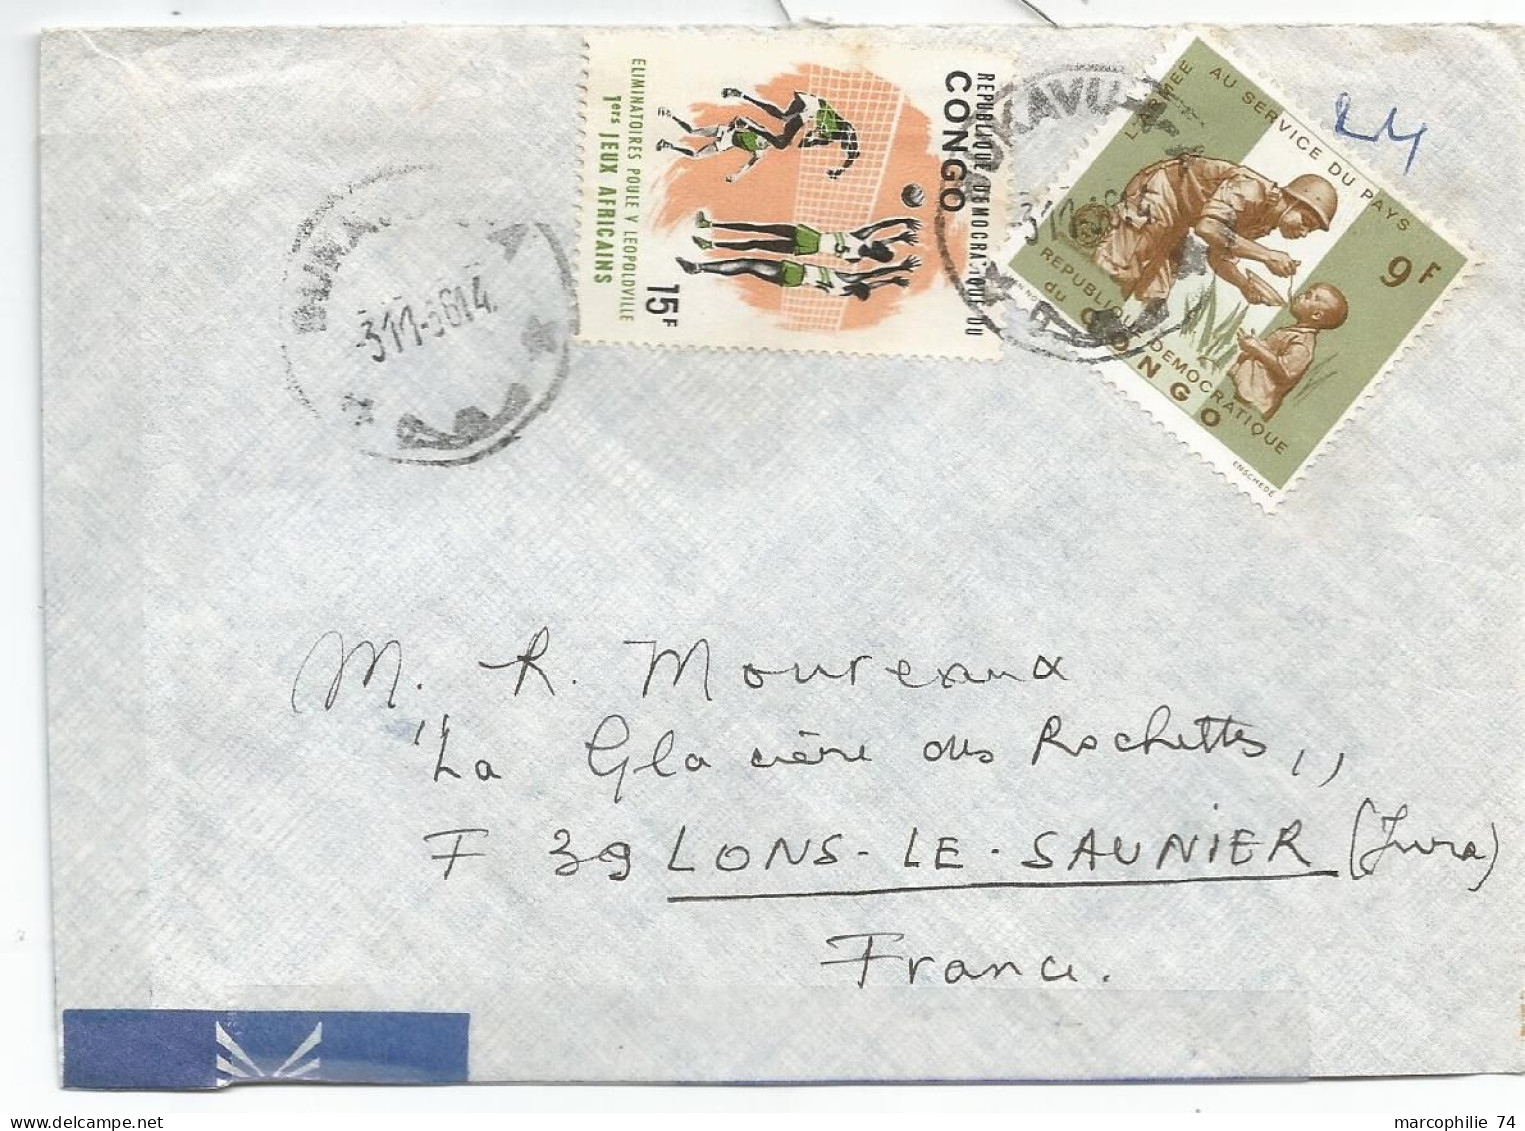 CONGO BELGE 9FR + 15FR VOLLEY BALL LETTRE COVER AVION BUKAVU 1964 TO FRANCE - Lettres & Documents